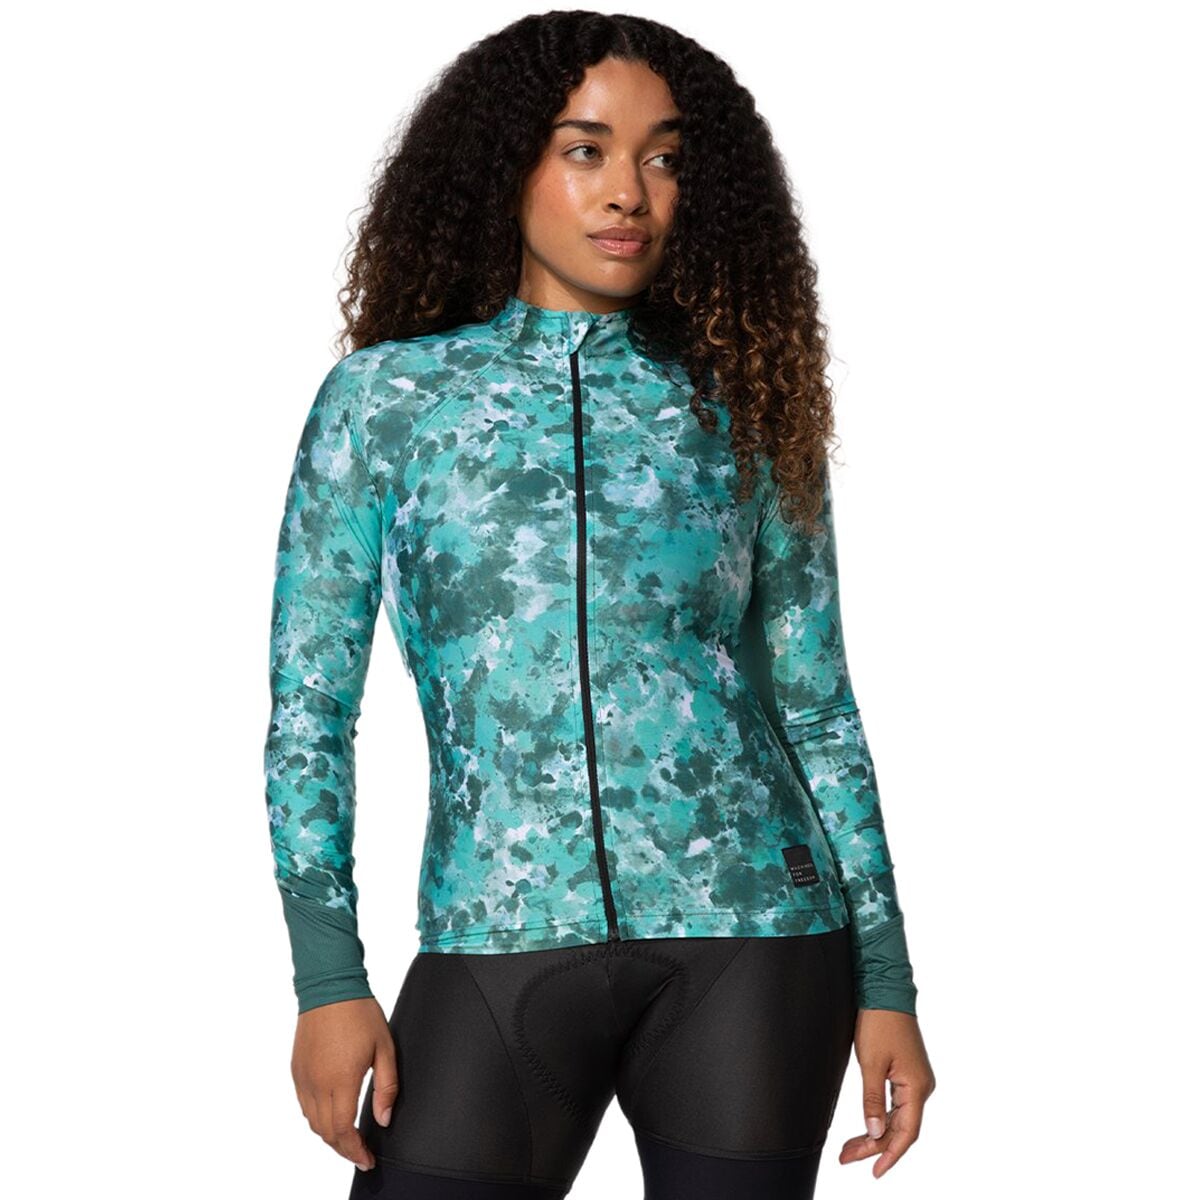 Machines for Freedom Summerweight Long-Sleeve Jersey - Women's